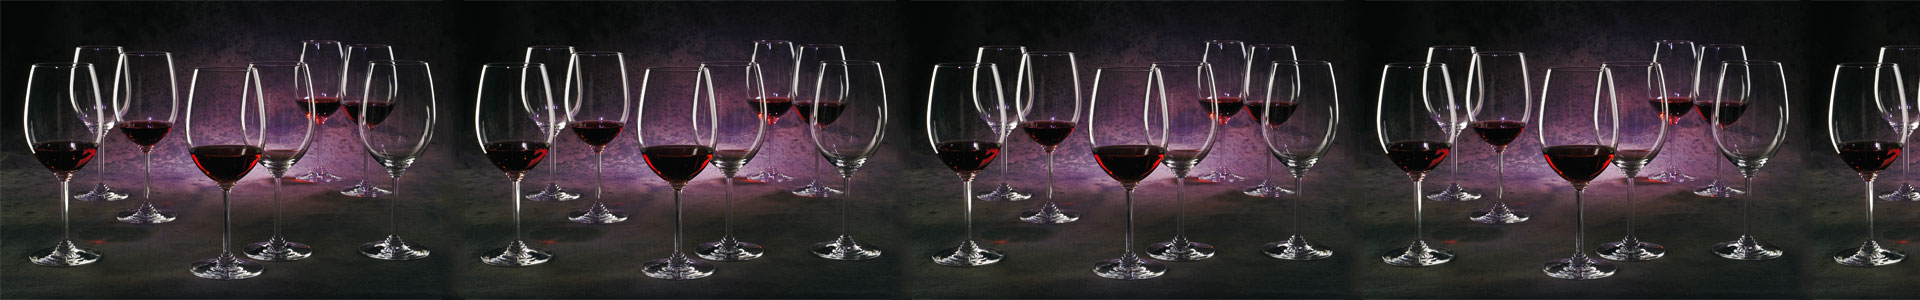 Numerous wine glasses from the Riedel Wine series are filled with red wine and stand in violet light.